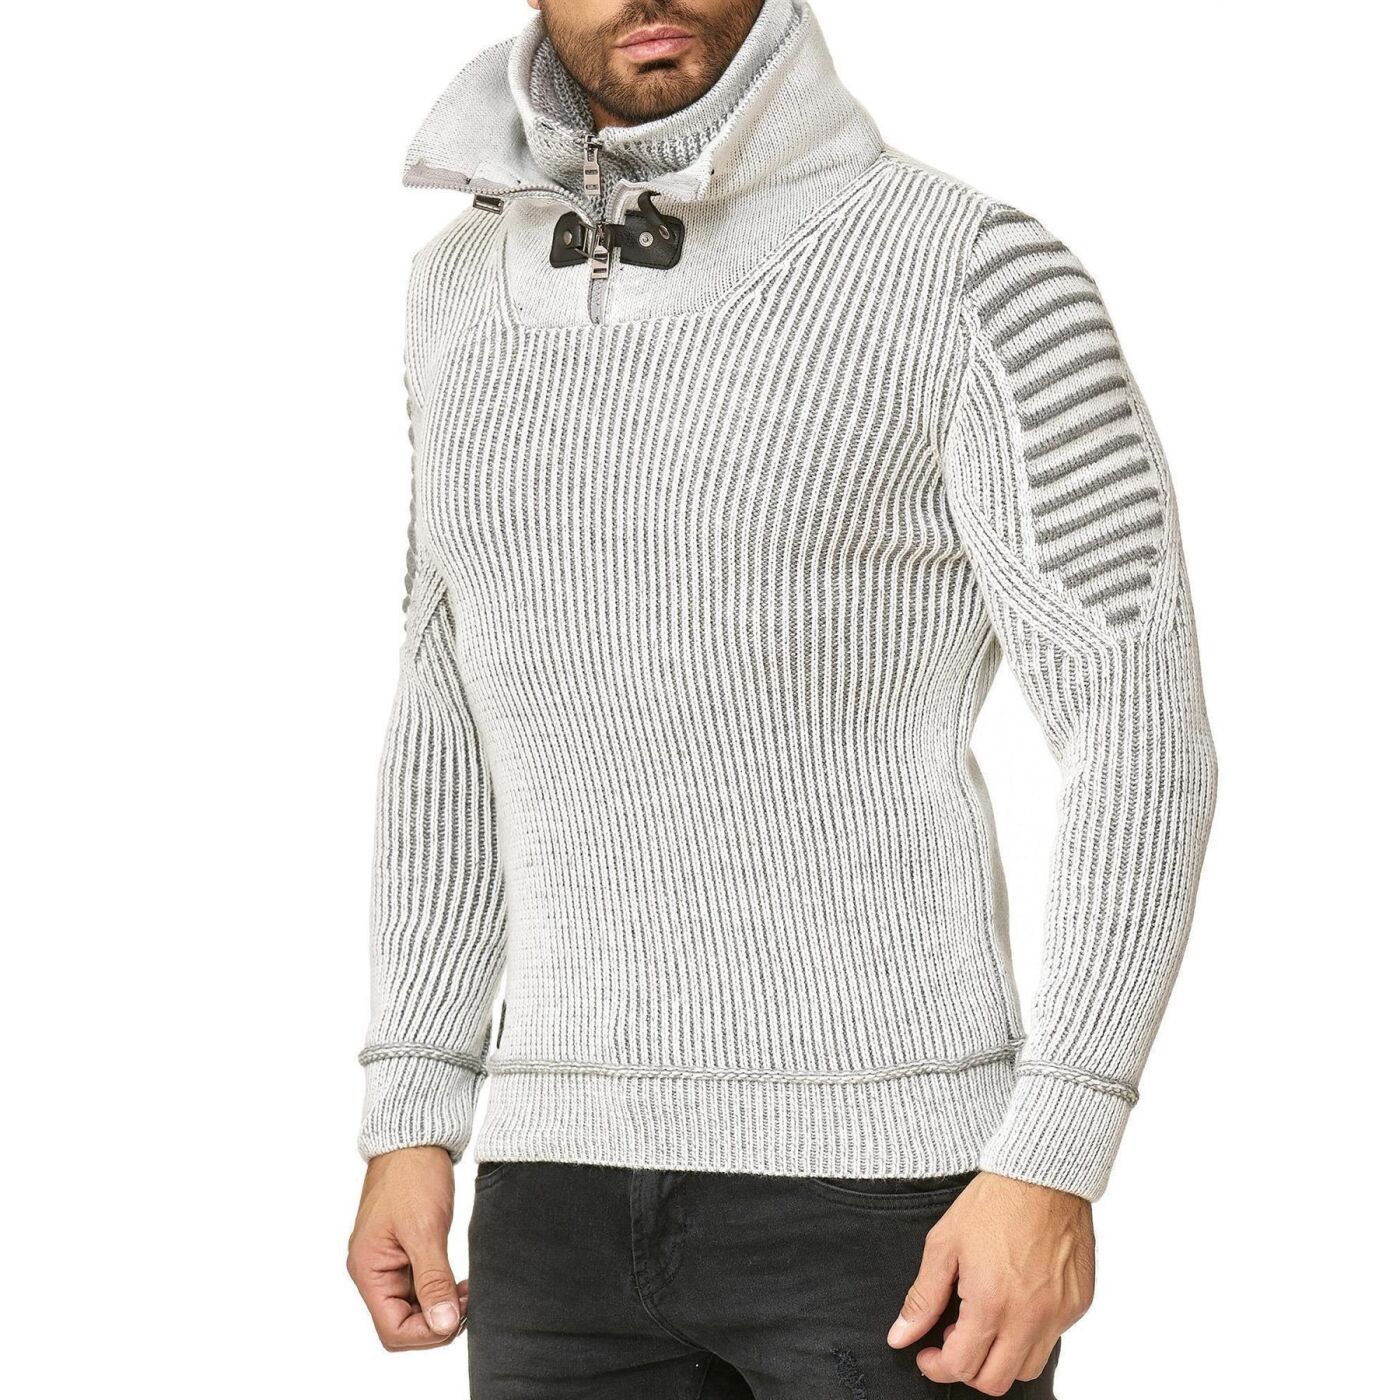 Engaño mitología Cuna Red Bridge Mens Knit Jumper Double Layer Collar High stand-up collar , €  19,90